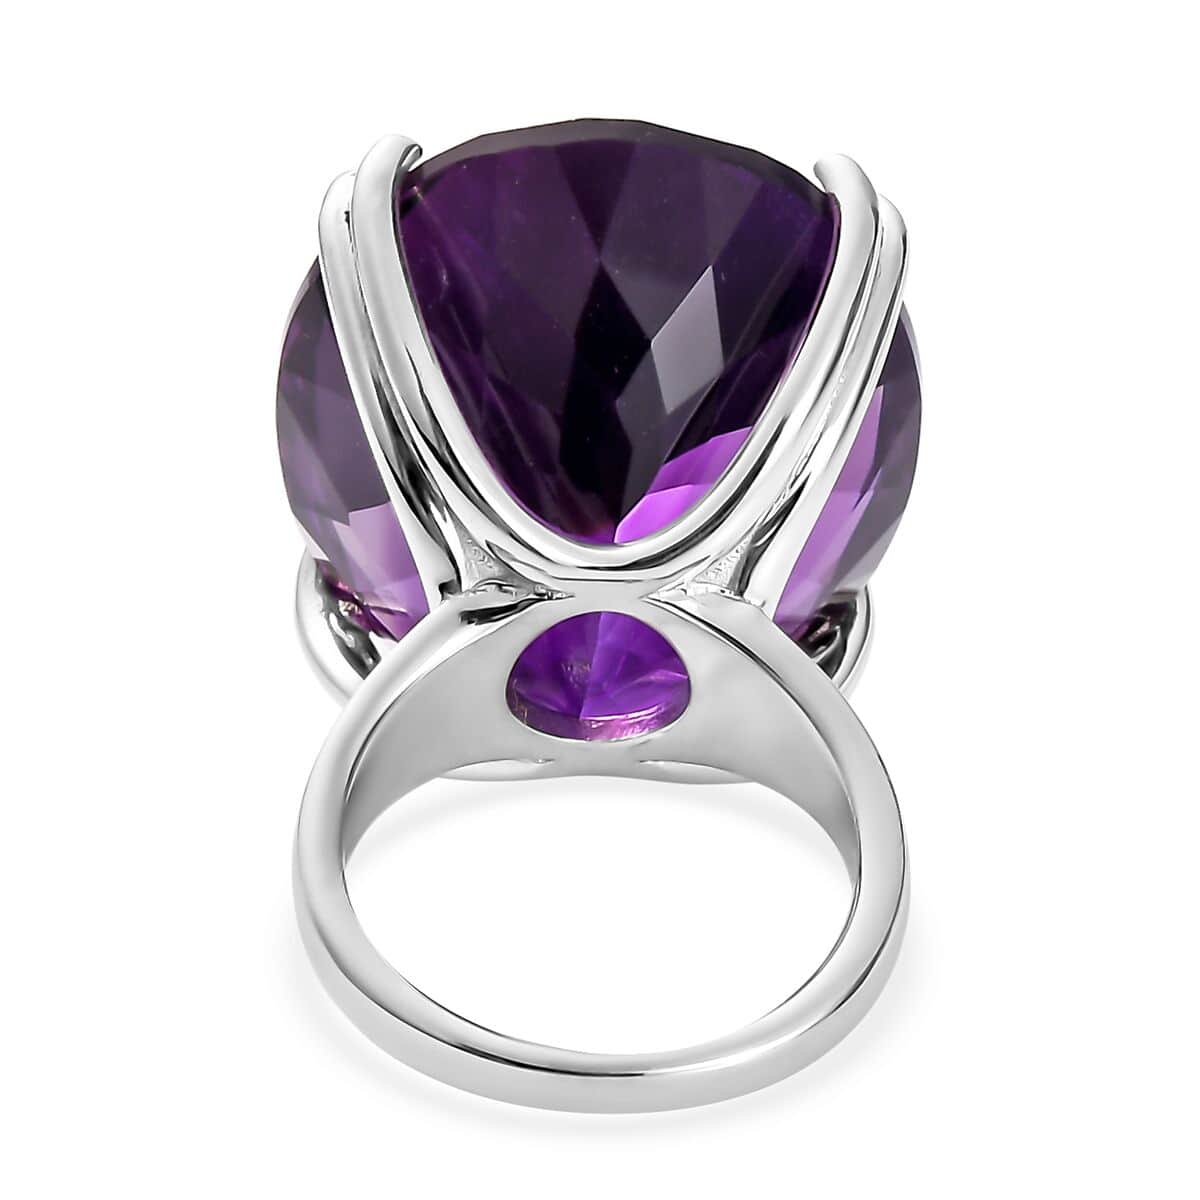 Buy African Amethyst Solitaire Ring in Platinum Over Sterling